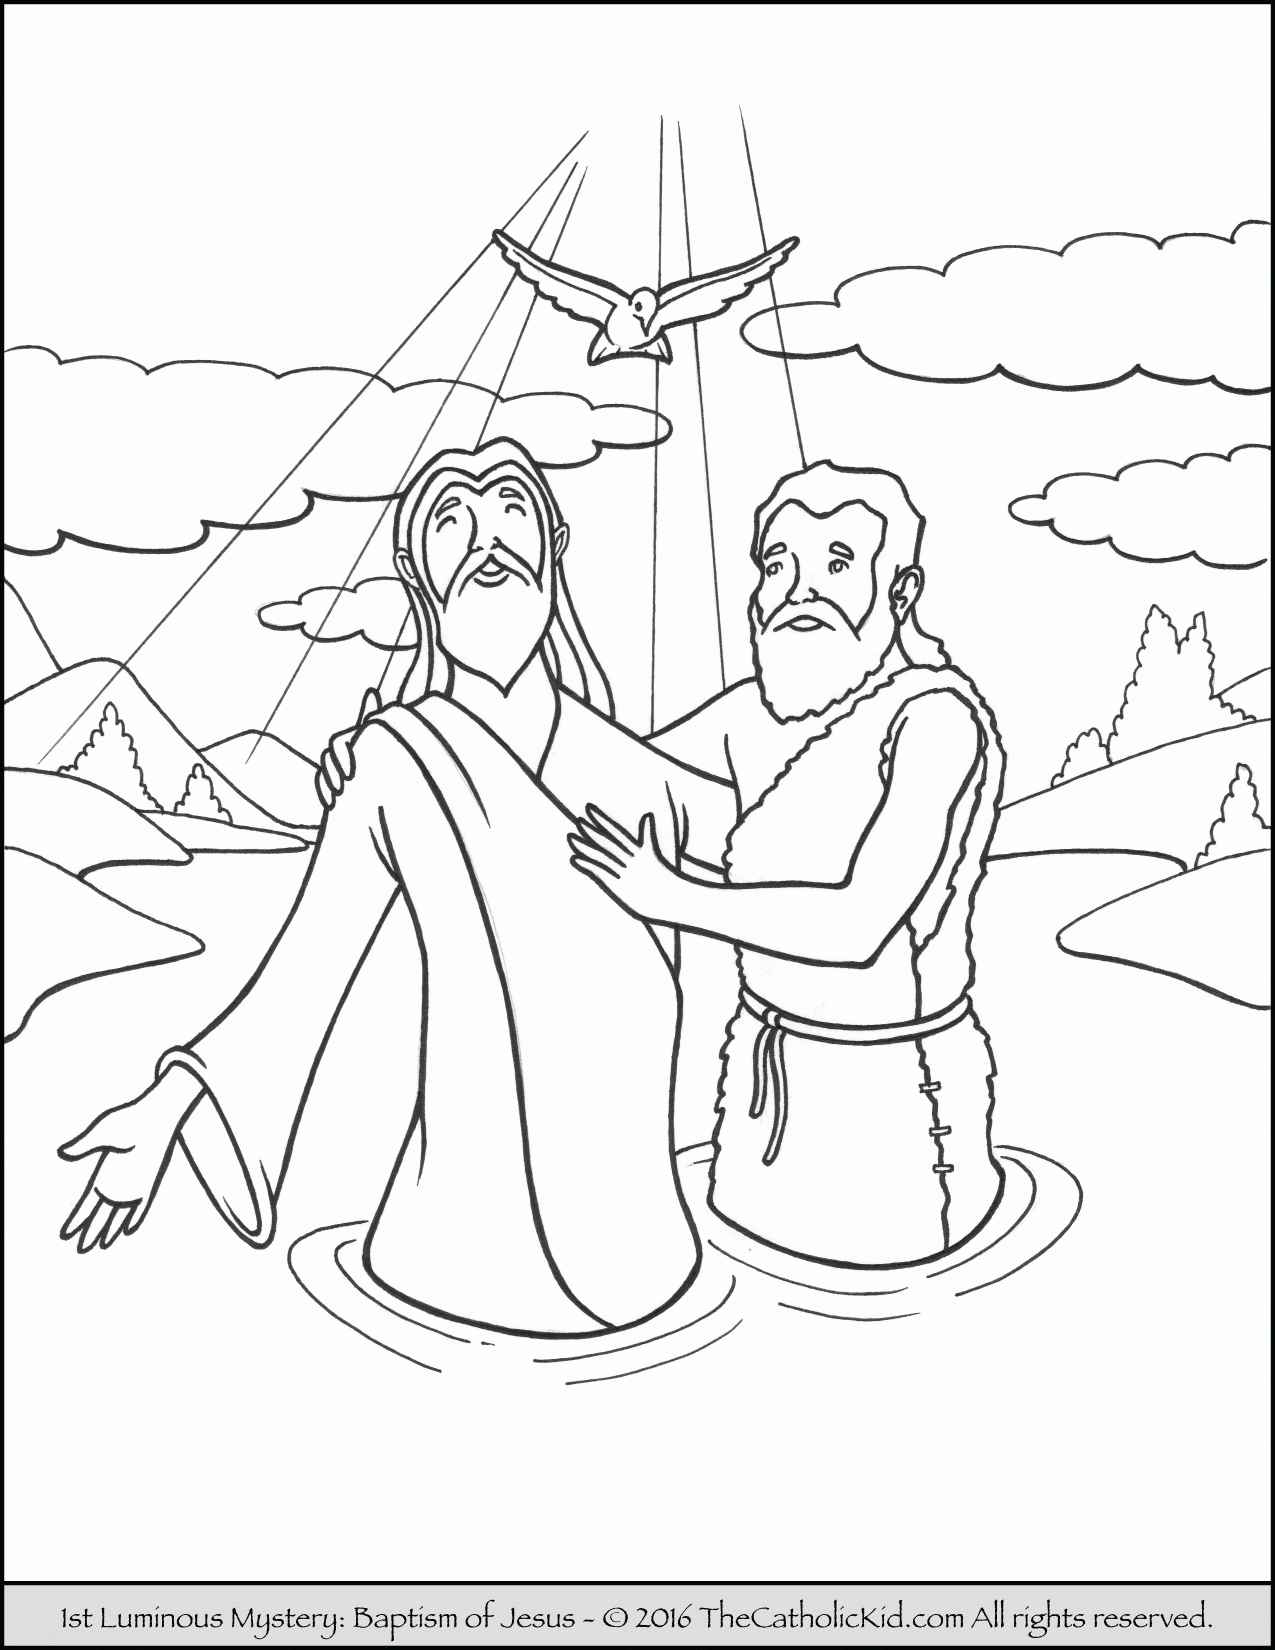 The 4th Luminous Mystery Coloring Page – The Transfiguration ...